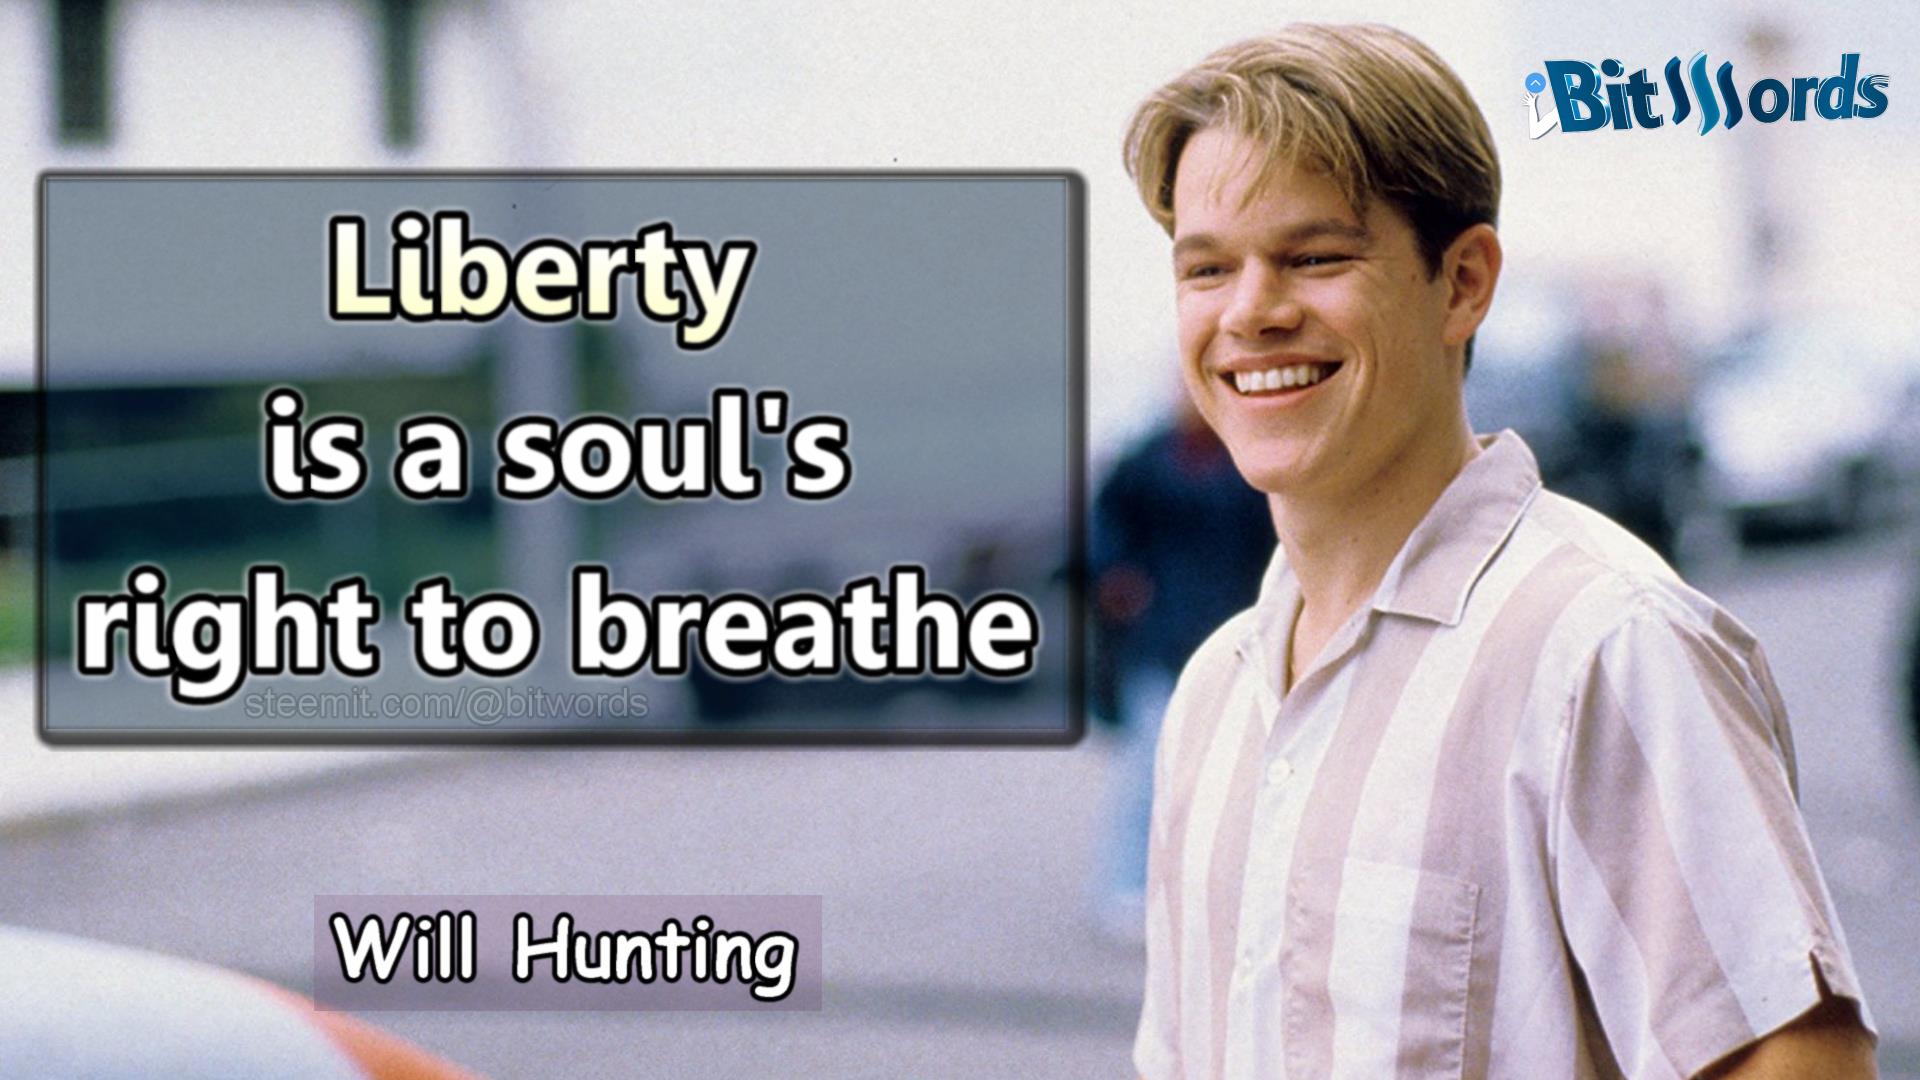 bitwords steemit daily movie quote liberty is a soul's right to breathe good will hunting.jpg